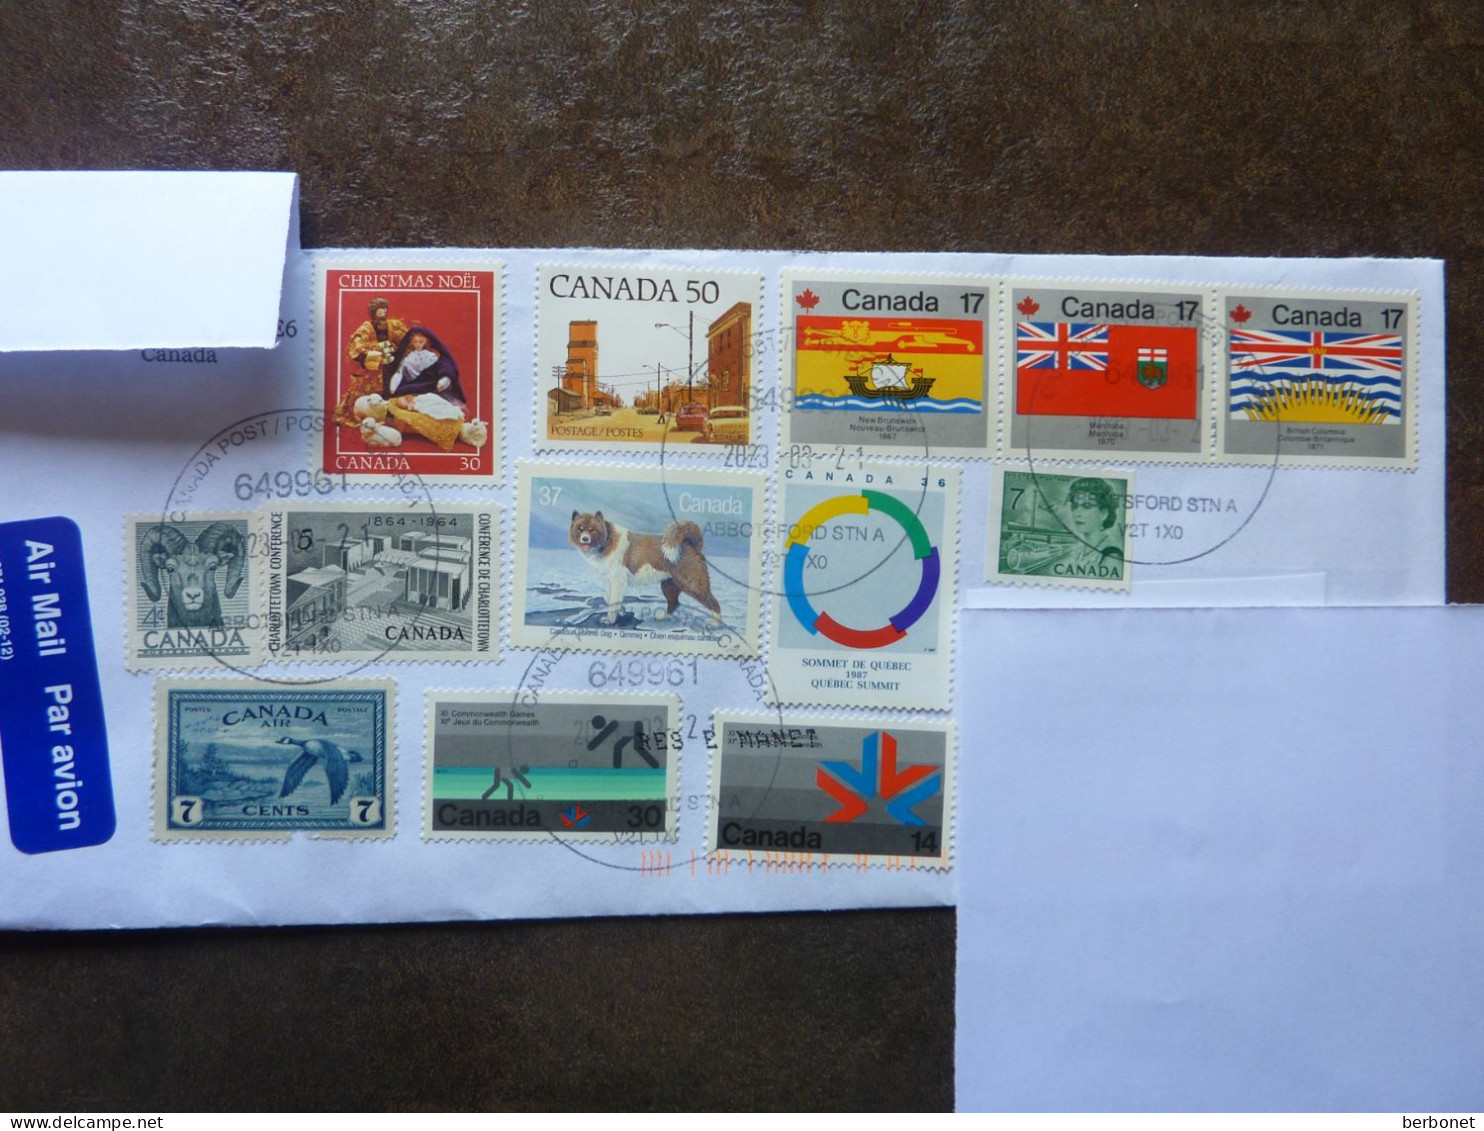 13 Perfect Stamps On A Letter - Usados